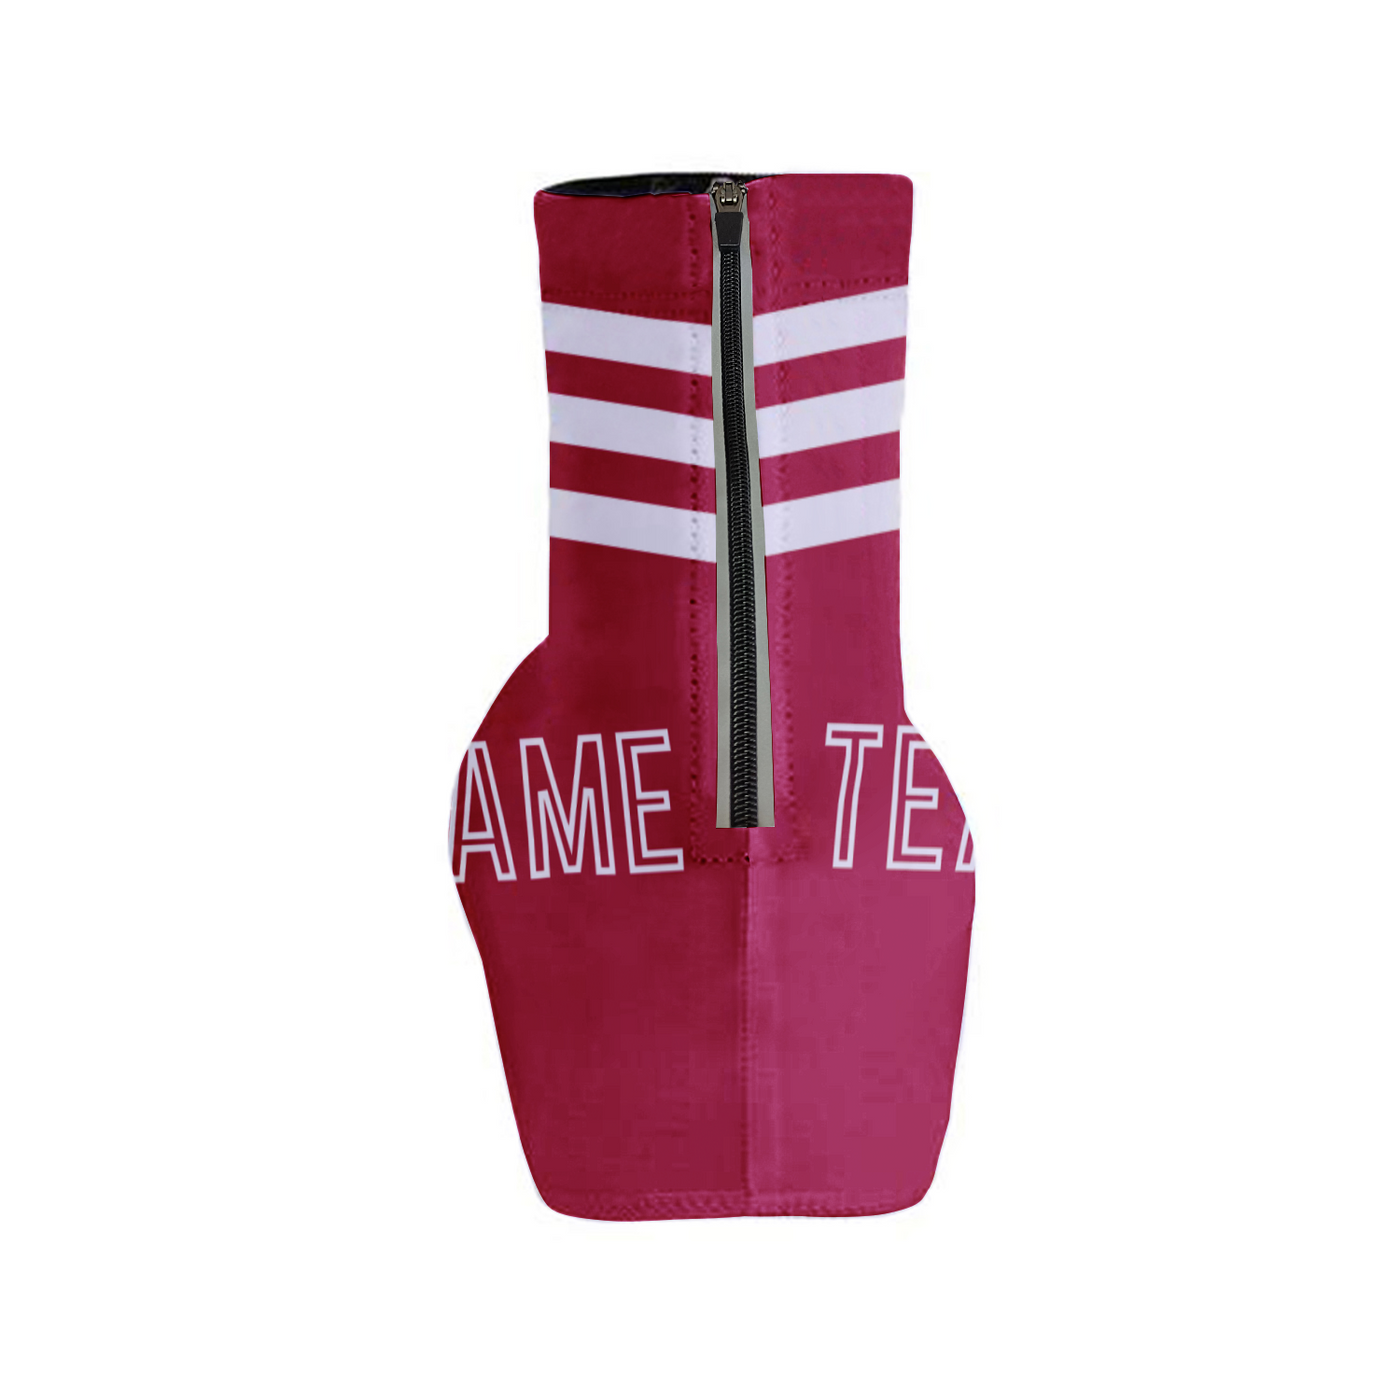 Customized San Francisco Team Cycling Shoe Covers